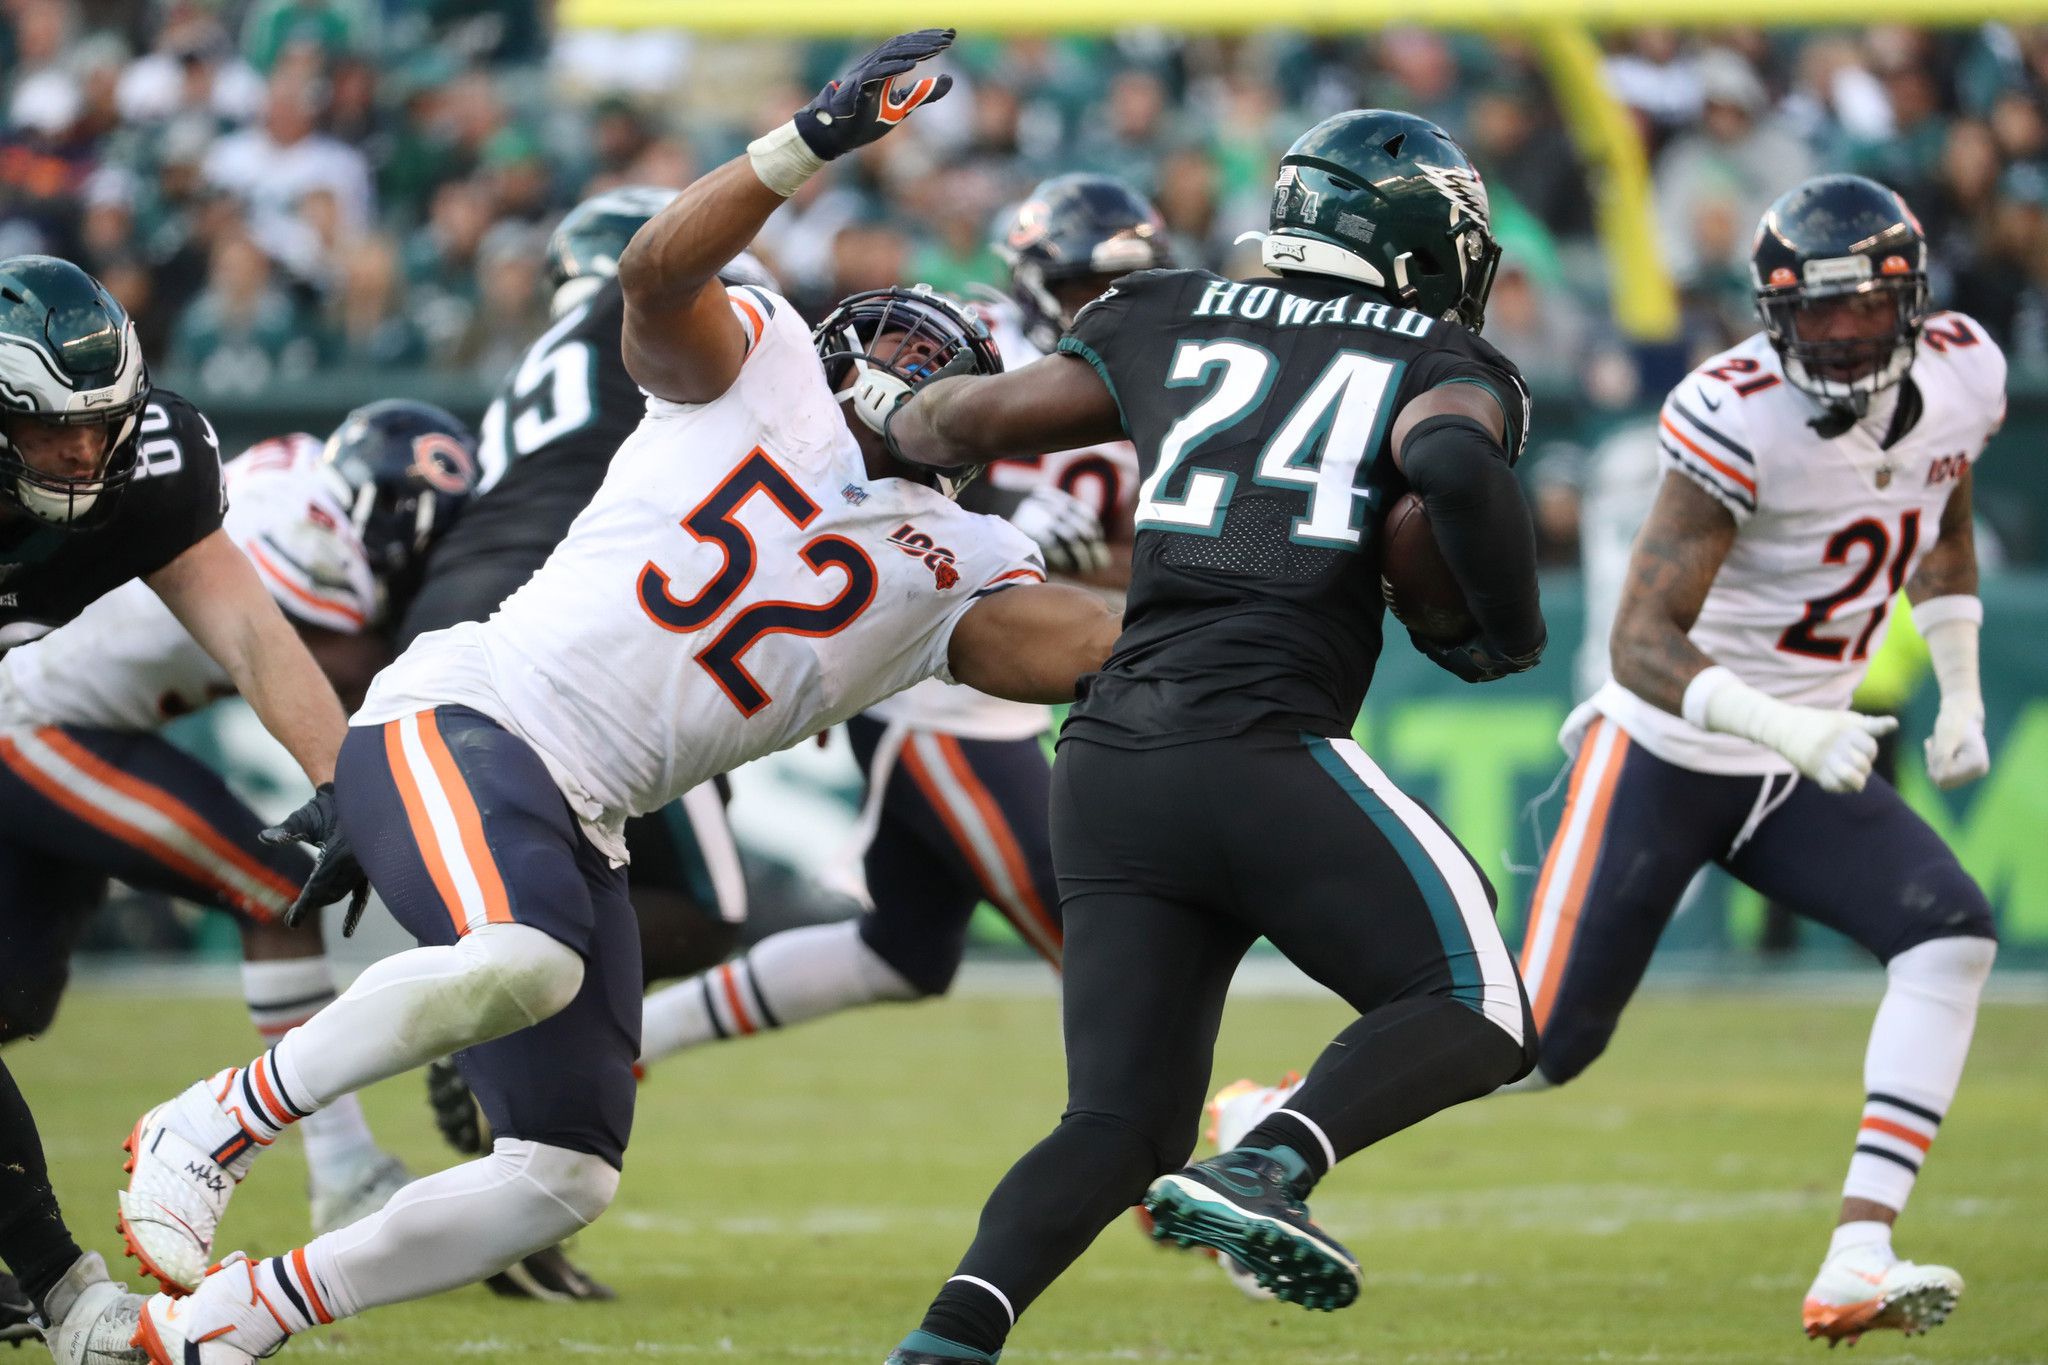 Chicago Bears play Eagles Sunday, and here are 3 keys to the game